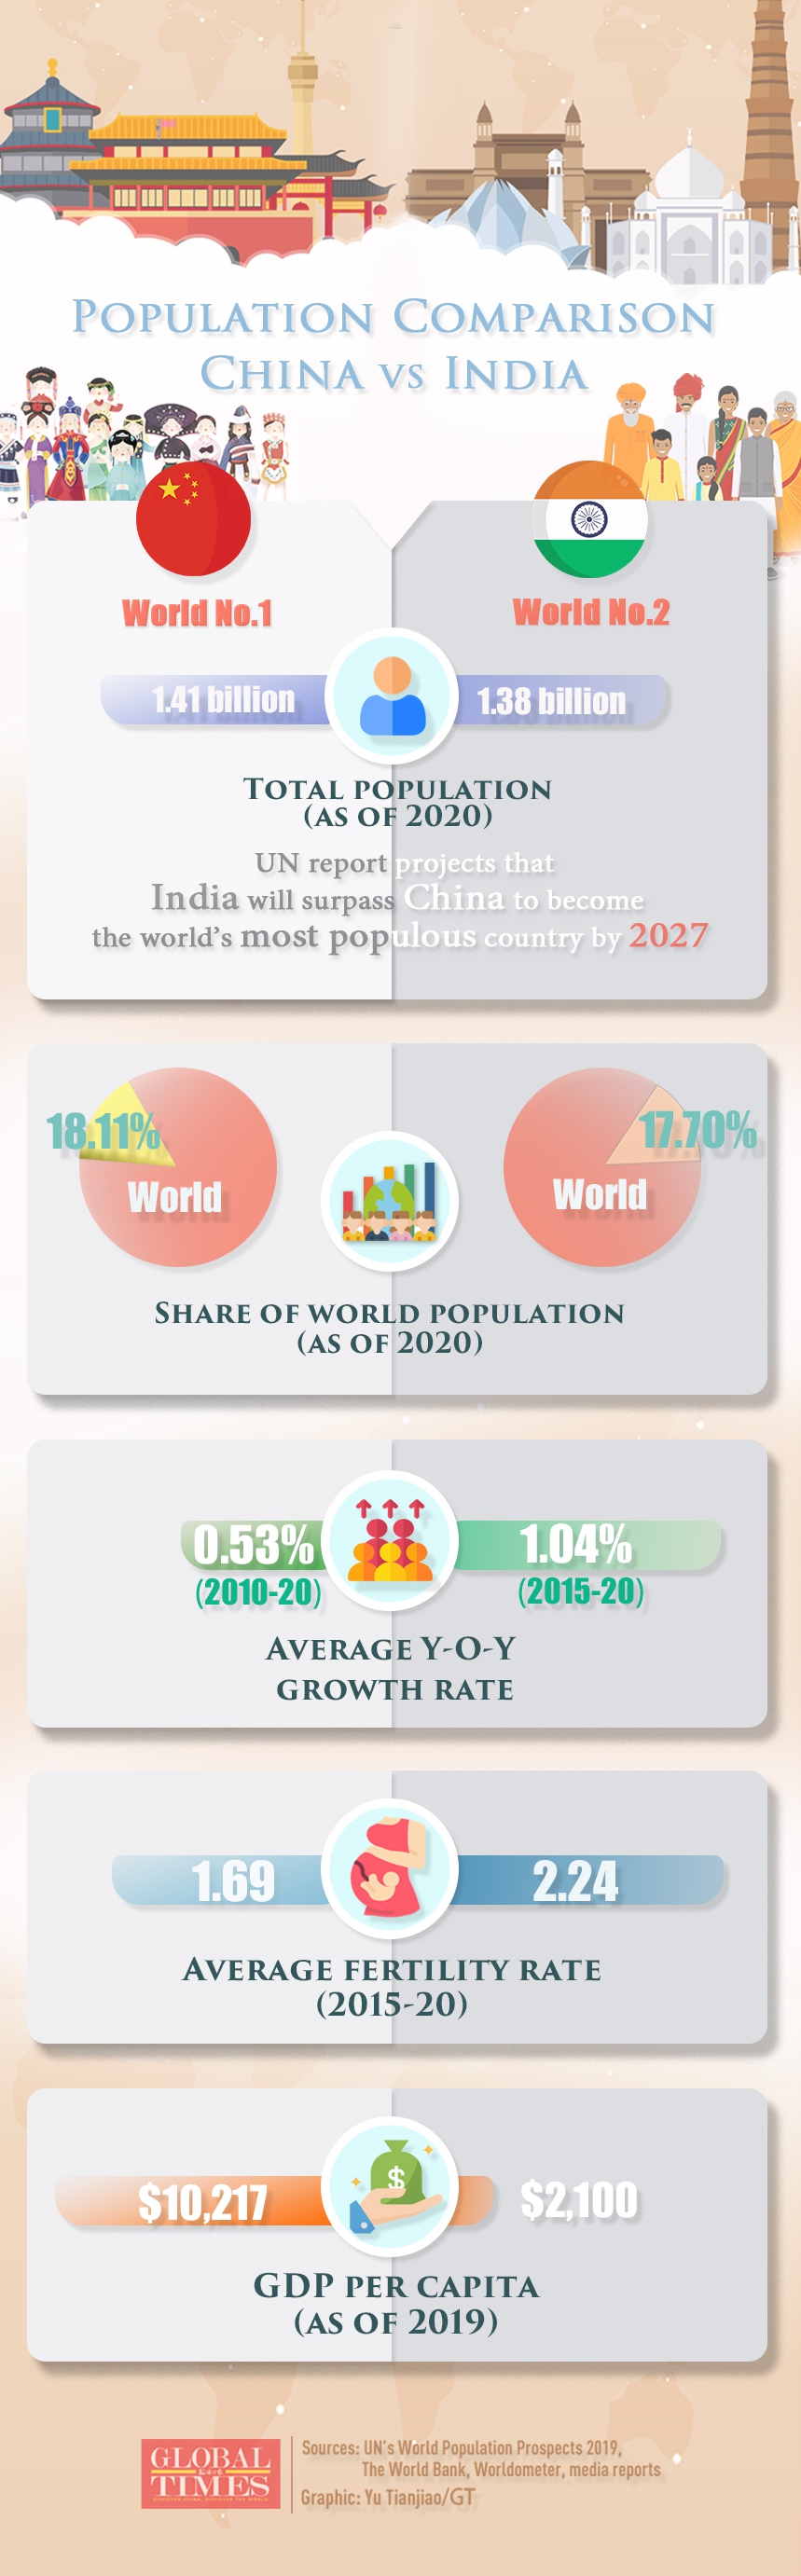 China unveiled the results of its once-a-decade population census on Tuesday. Let’s take a look at population comparisons between China and India, the two most populated countries in the world.